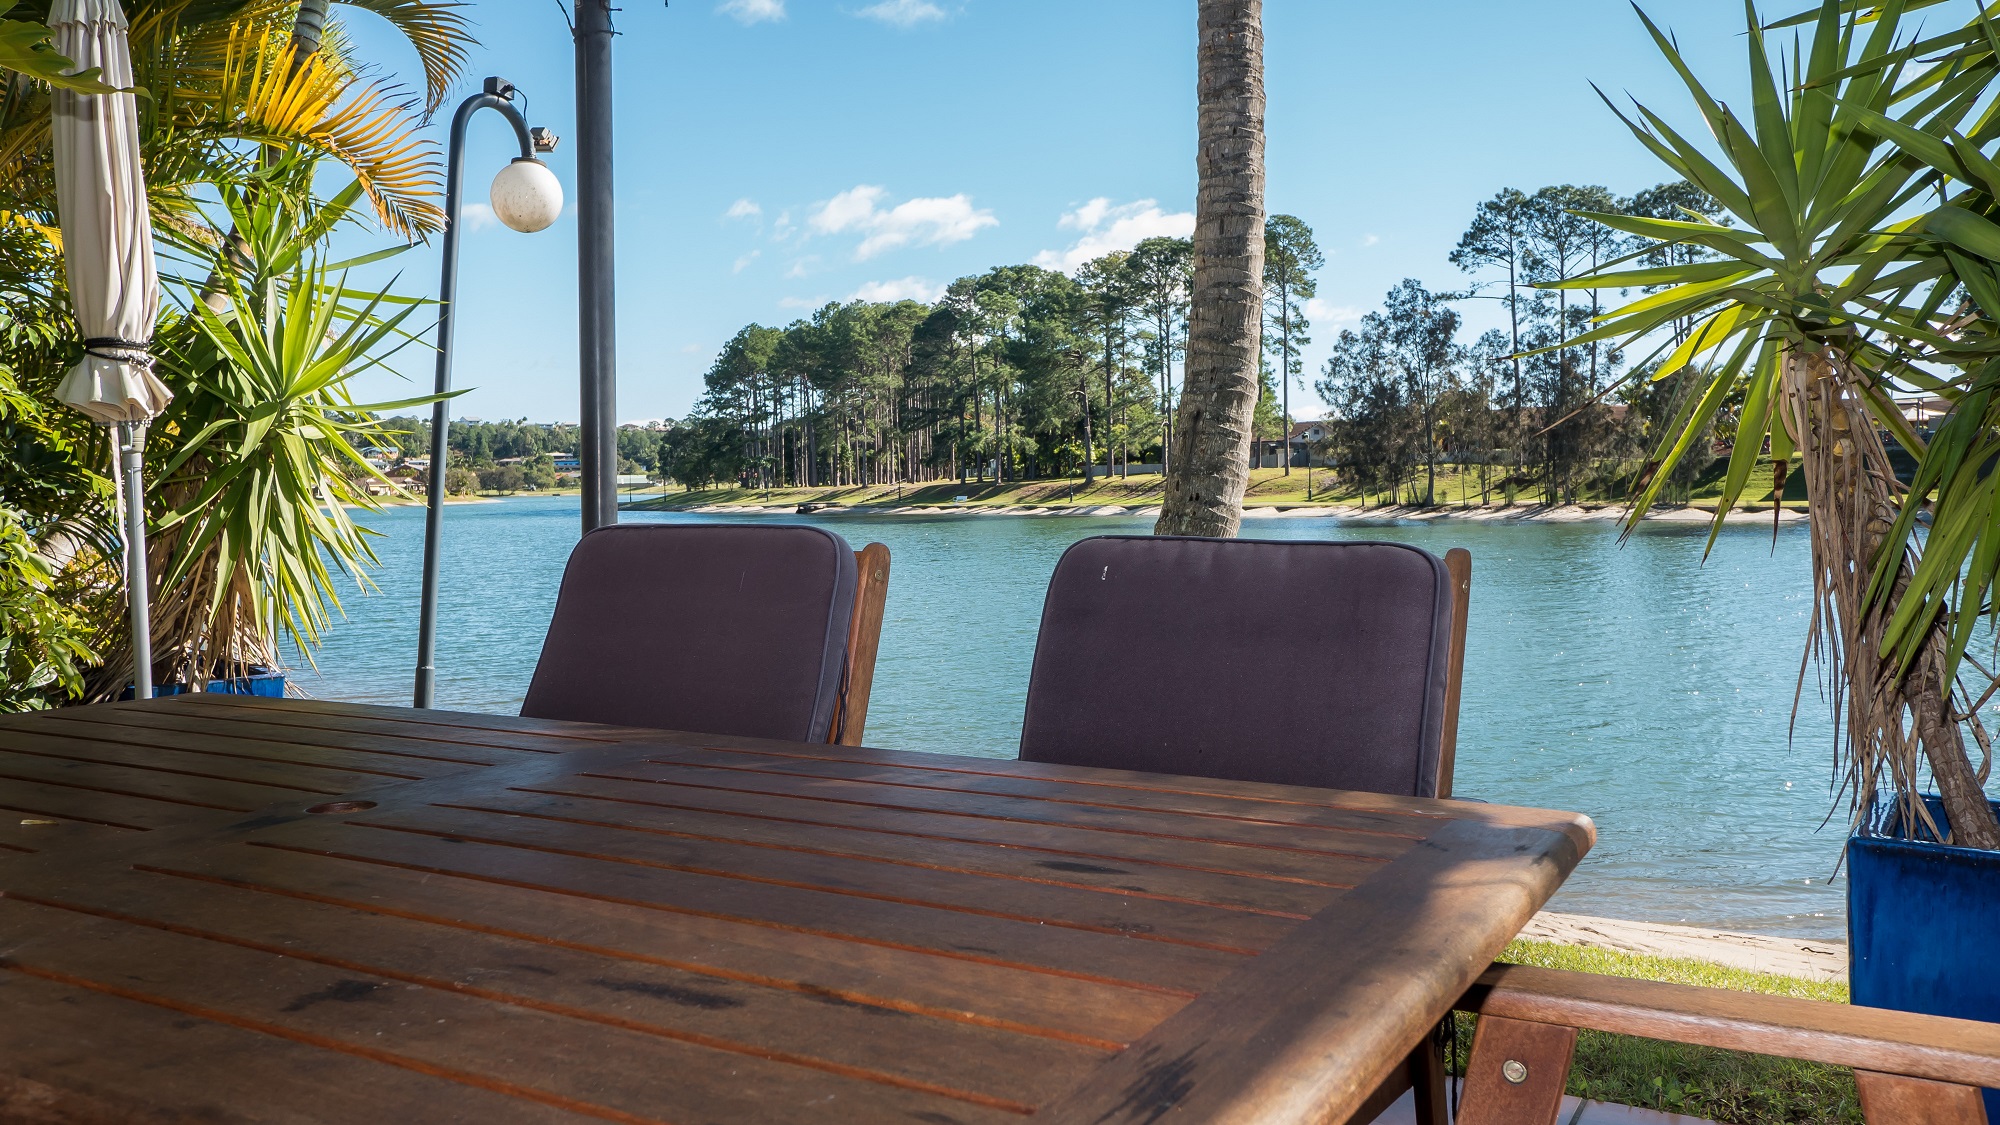 Isle of Palms Resort - Waterfront Outdoor Dining